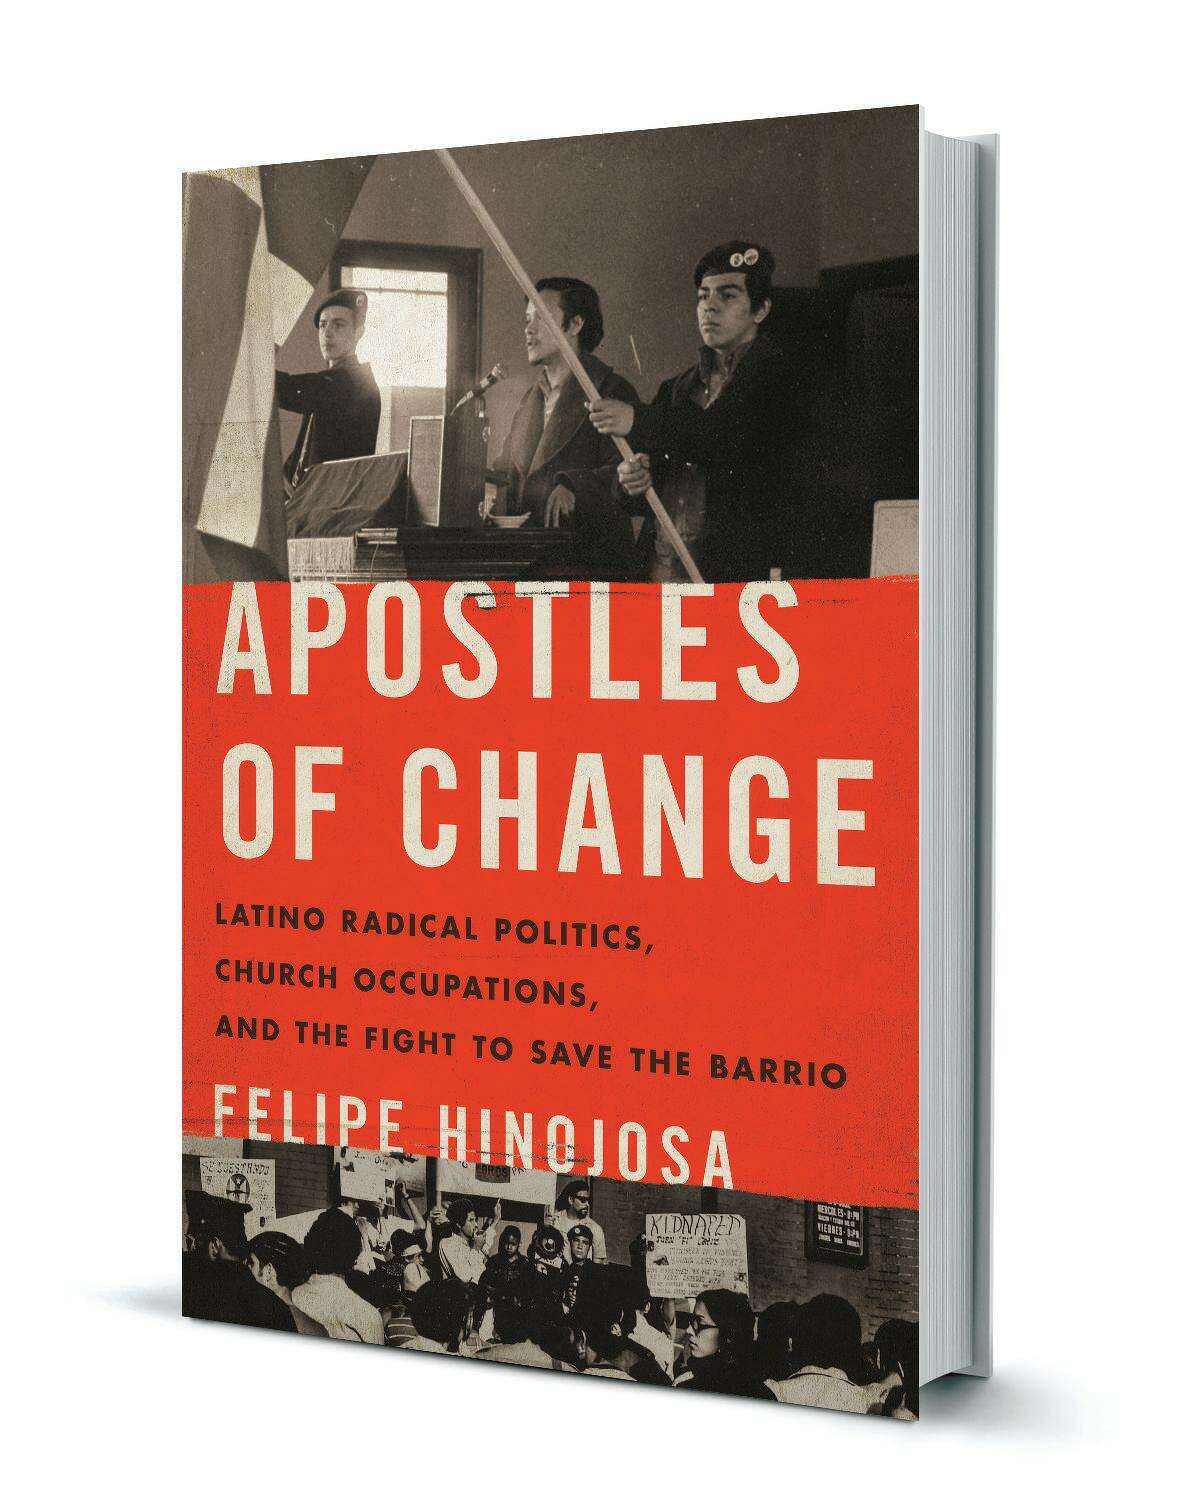 Felipe Hinojosa is an associate professor of history at Texas A&M University and the author of the new book, Apostles of Change: Latino Radical Politics, Church Occupations, and the Fight to Save the Barrio.